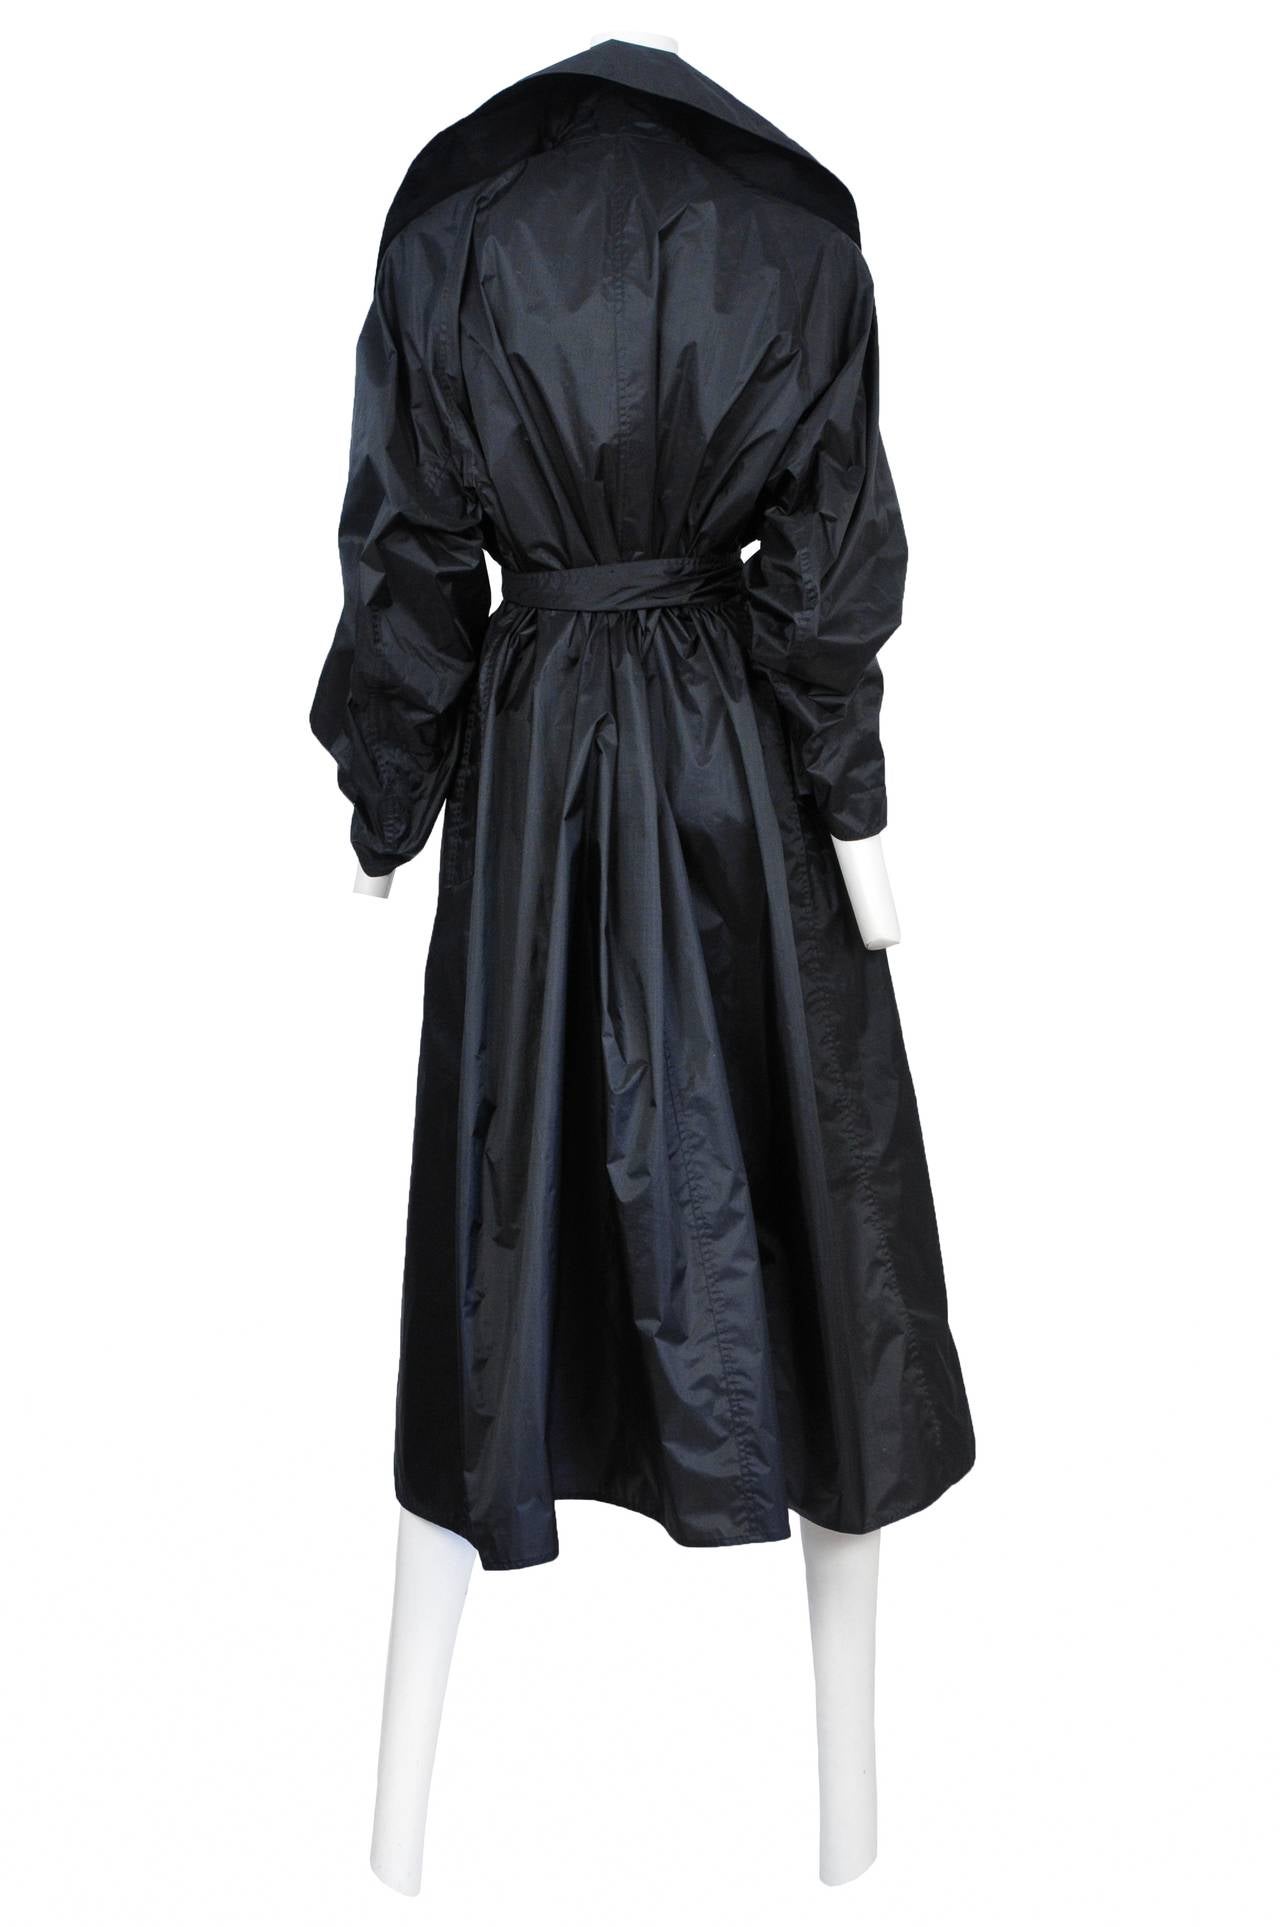 Vintage Azzedine Alaia black double breasted paper thin trench coat featuring a wide lapel and matching waist sash.